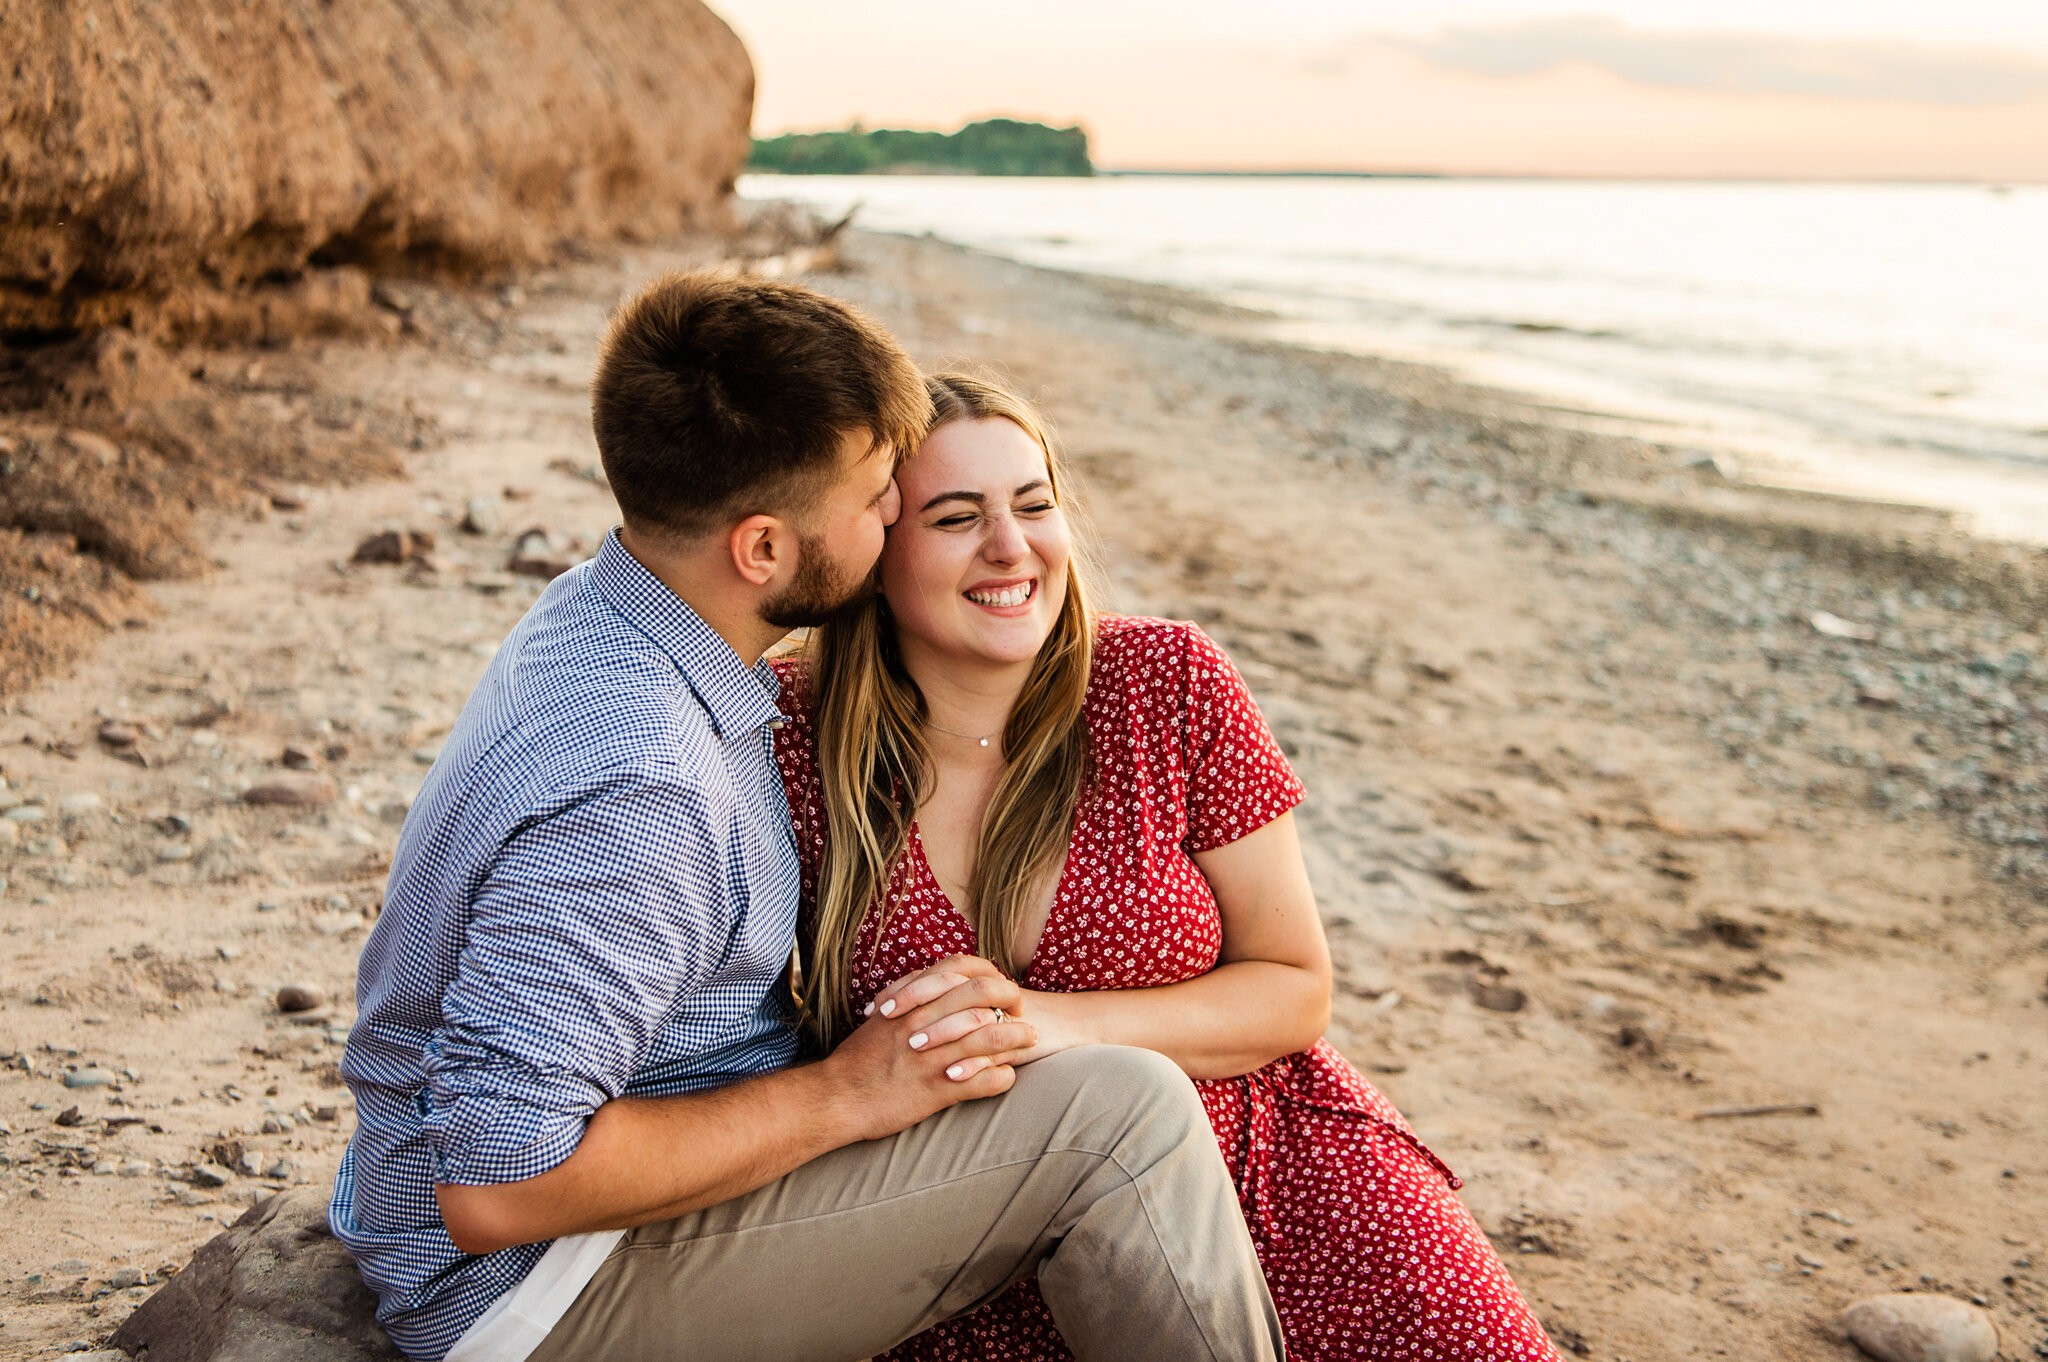 Chimney_Bluffs_State_Park_Rochester_Engagement_Session_JILL_STUDIO_Rochester_NY_Photographer_7223.jpg